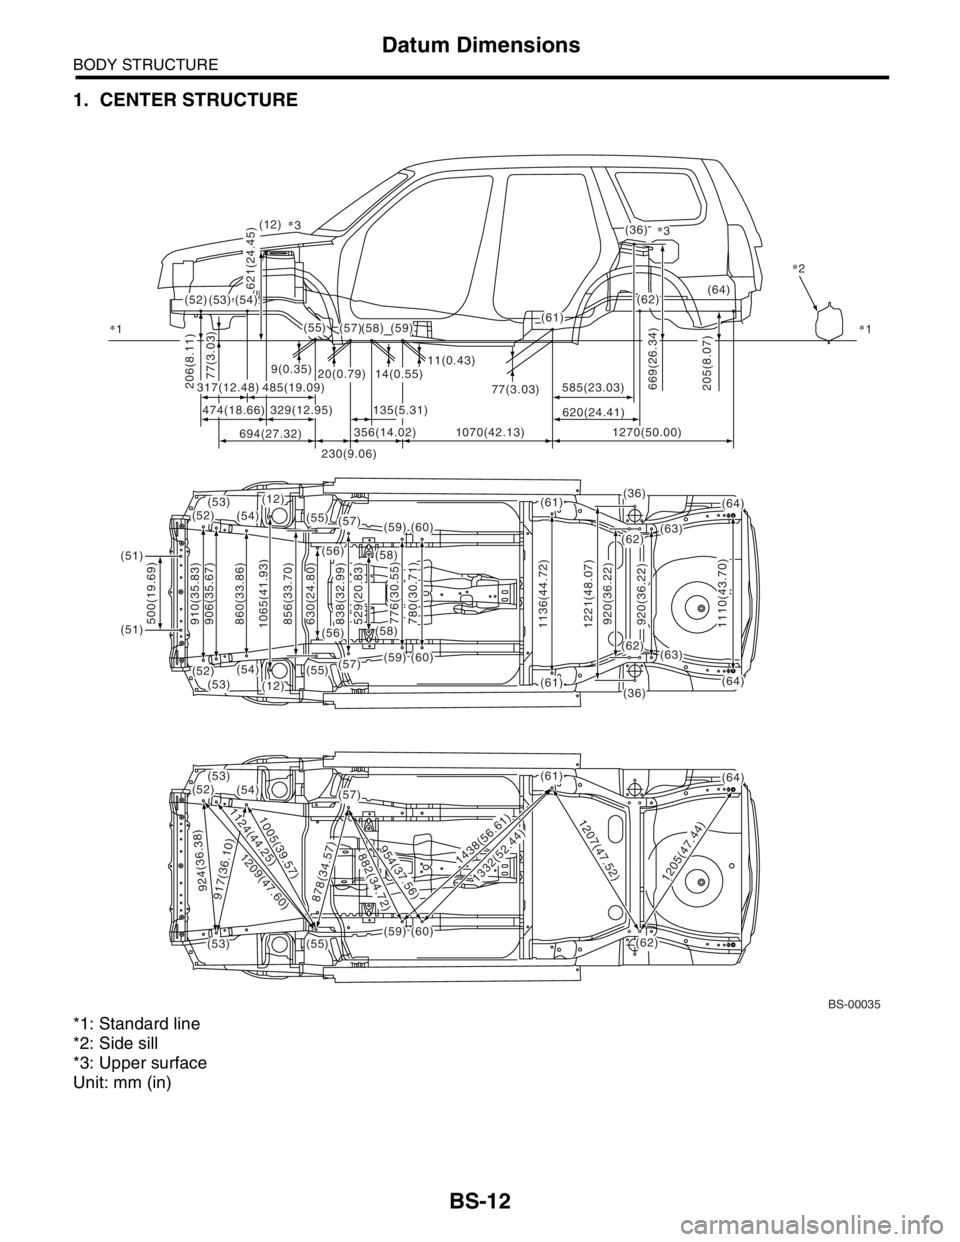 SUBARU FORESTER 2004  Service Repair Manual BS-12
BODY STRUCTURE
Datum Dimensions
1. CENTER STRUCTURE
*1: Standard line
*2: Side sill
*3: Upper surface
Unit: mm (in)
BS-00035
(54)(53)(52)
(55)(59)(57)(58)
(12)
(52)
(52)
(55)
(55)
(56)
(56)
(57)